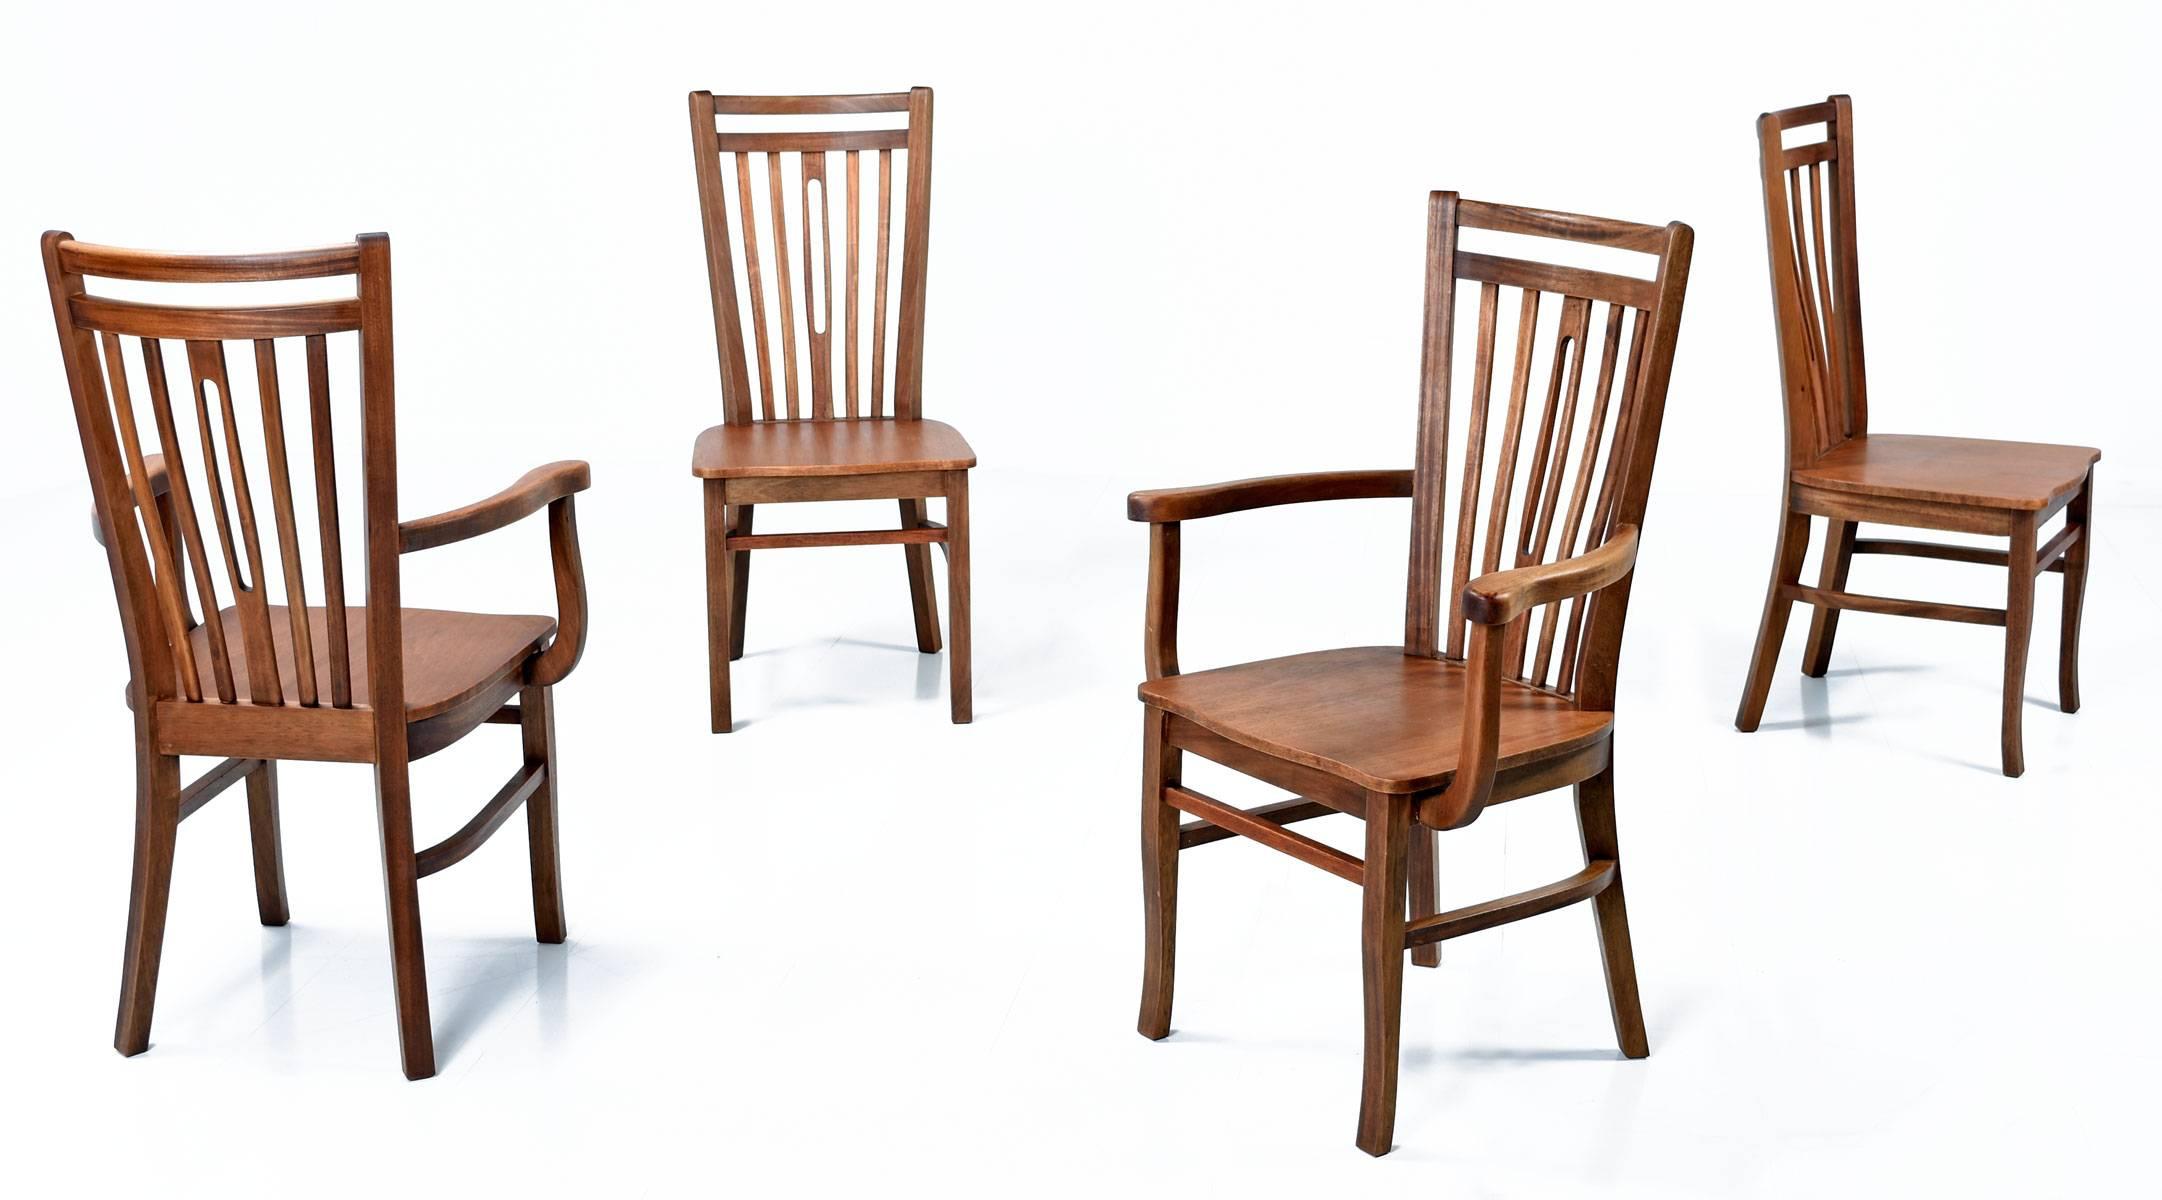 This remarkable set of four Mid-Century Modern dining chairs were handmade in Brazil, circa 1960s, out of exotic Brazilian hardwood. The set includes two armchairs and two arm less chairs.

Measures: Armchair 17